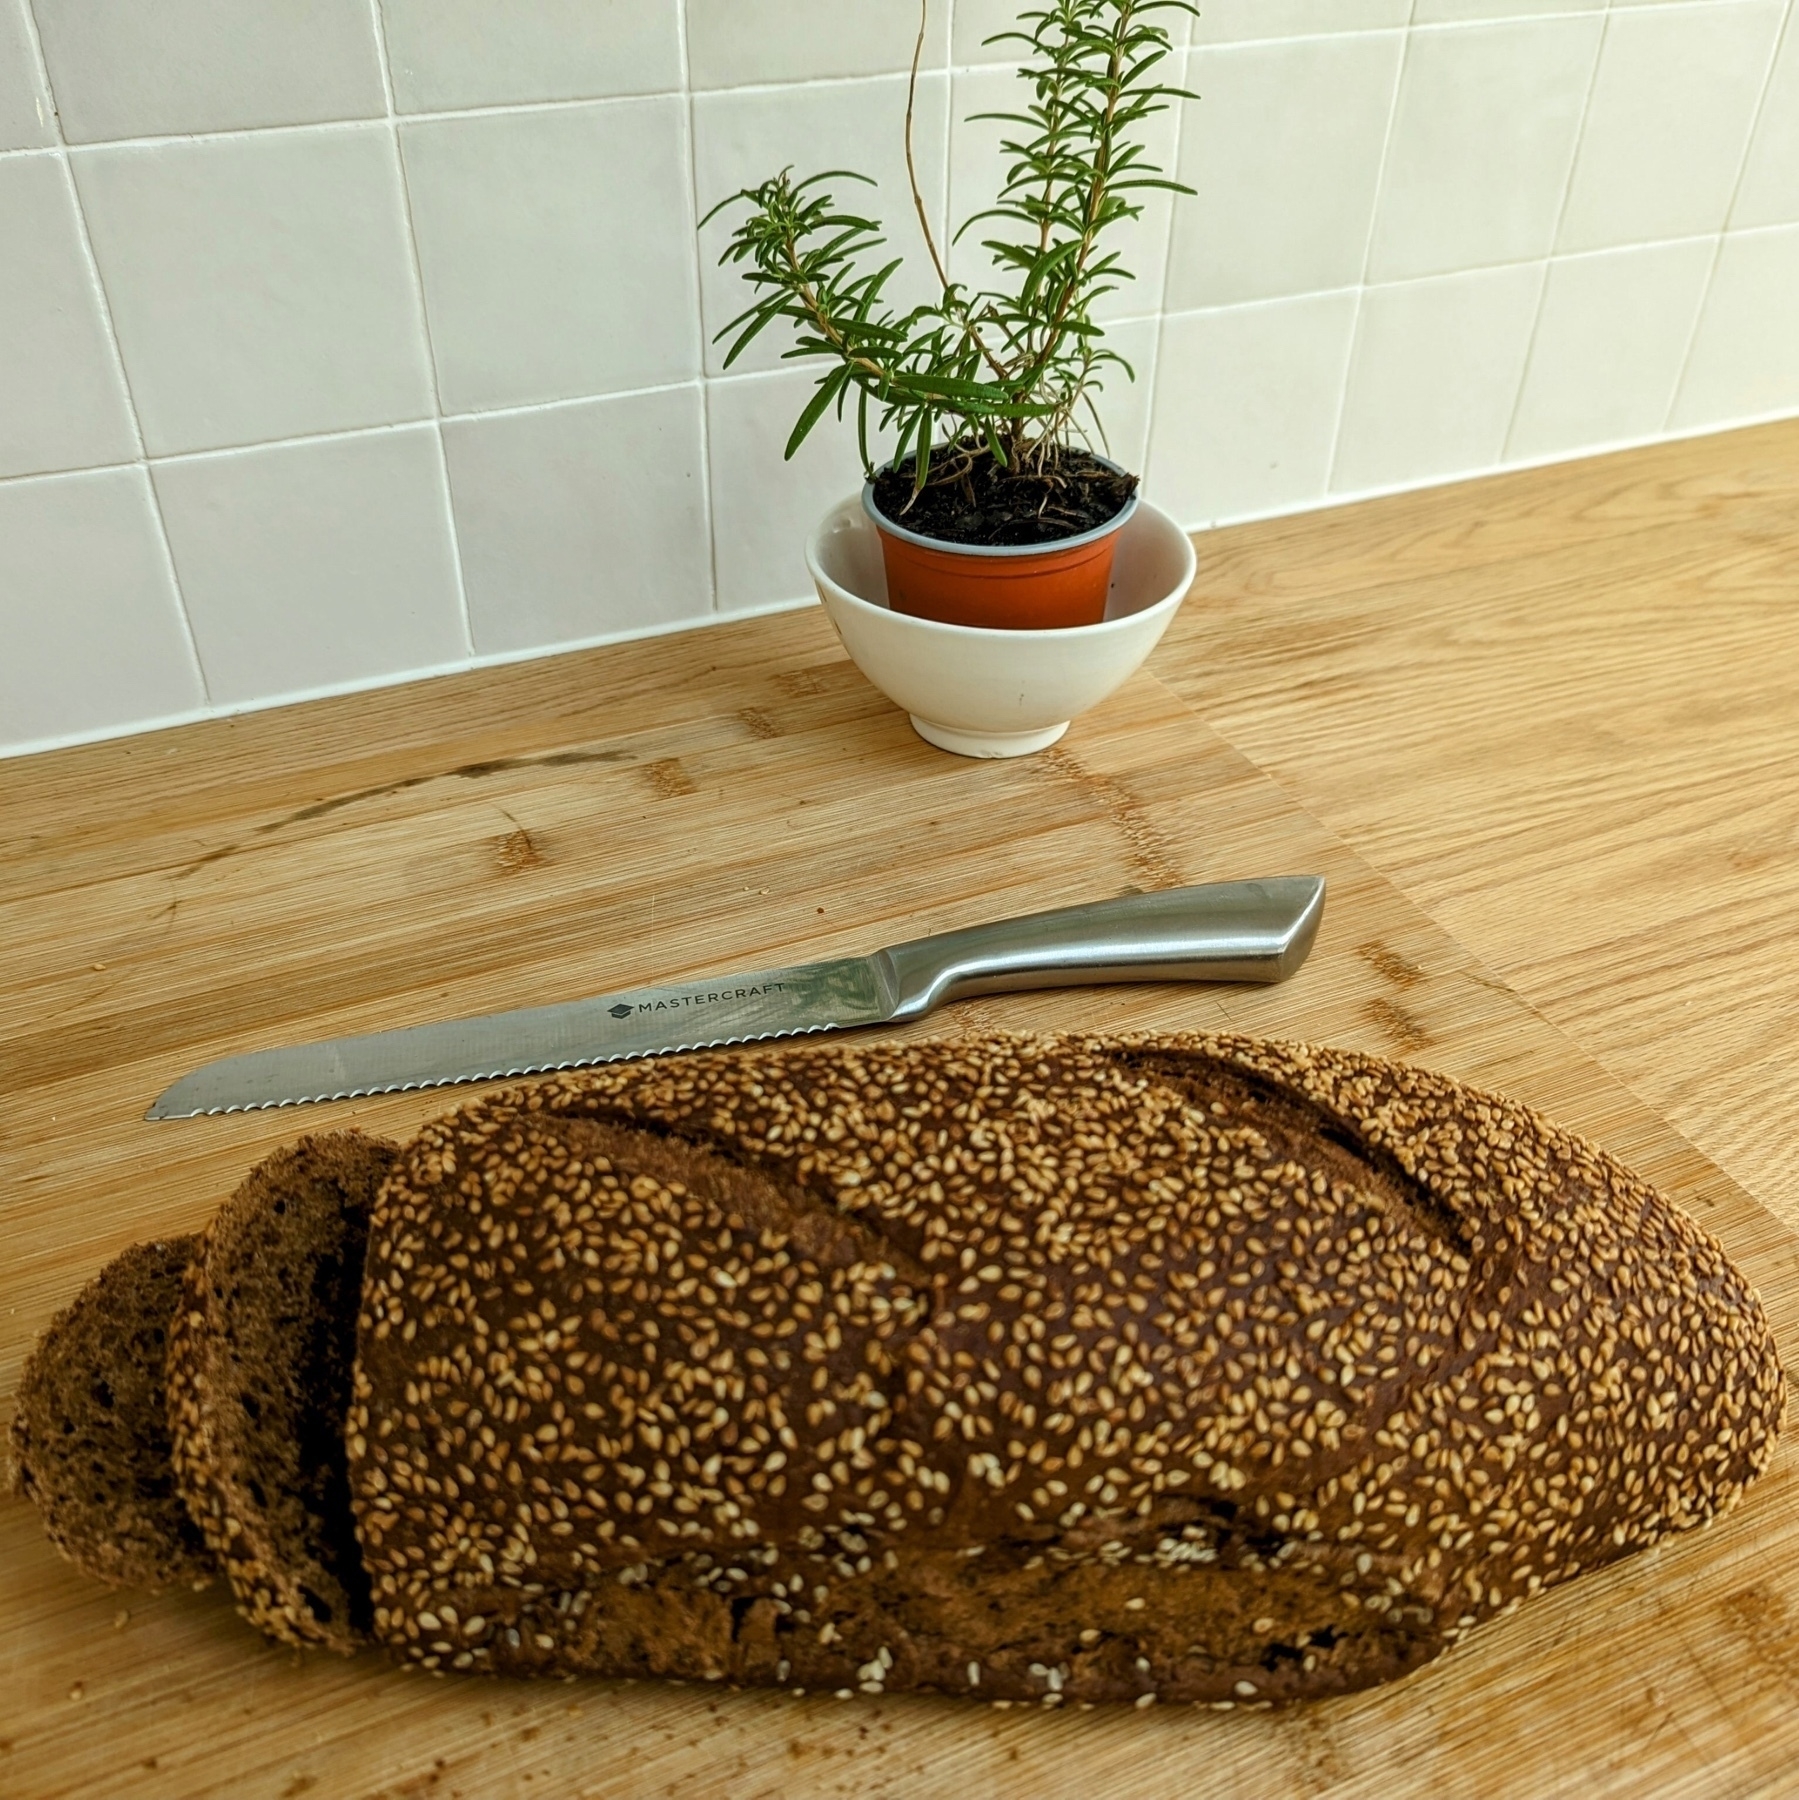 A wholemeal loaf on a bread board with a small potted rosemary plant behind. The loaf has a couple of slices already made.